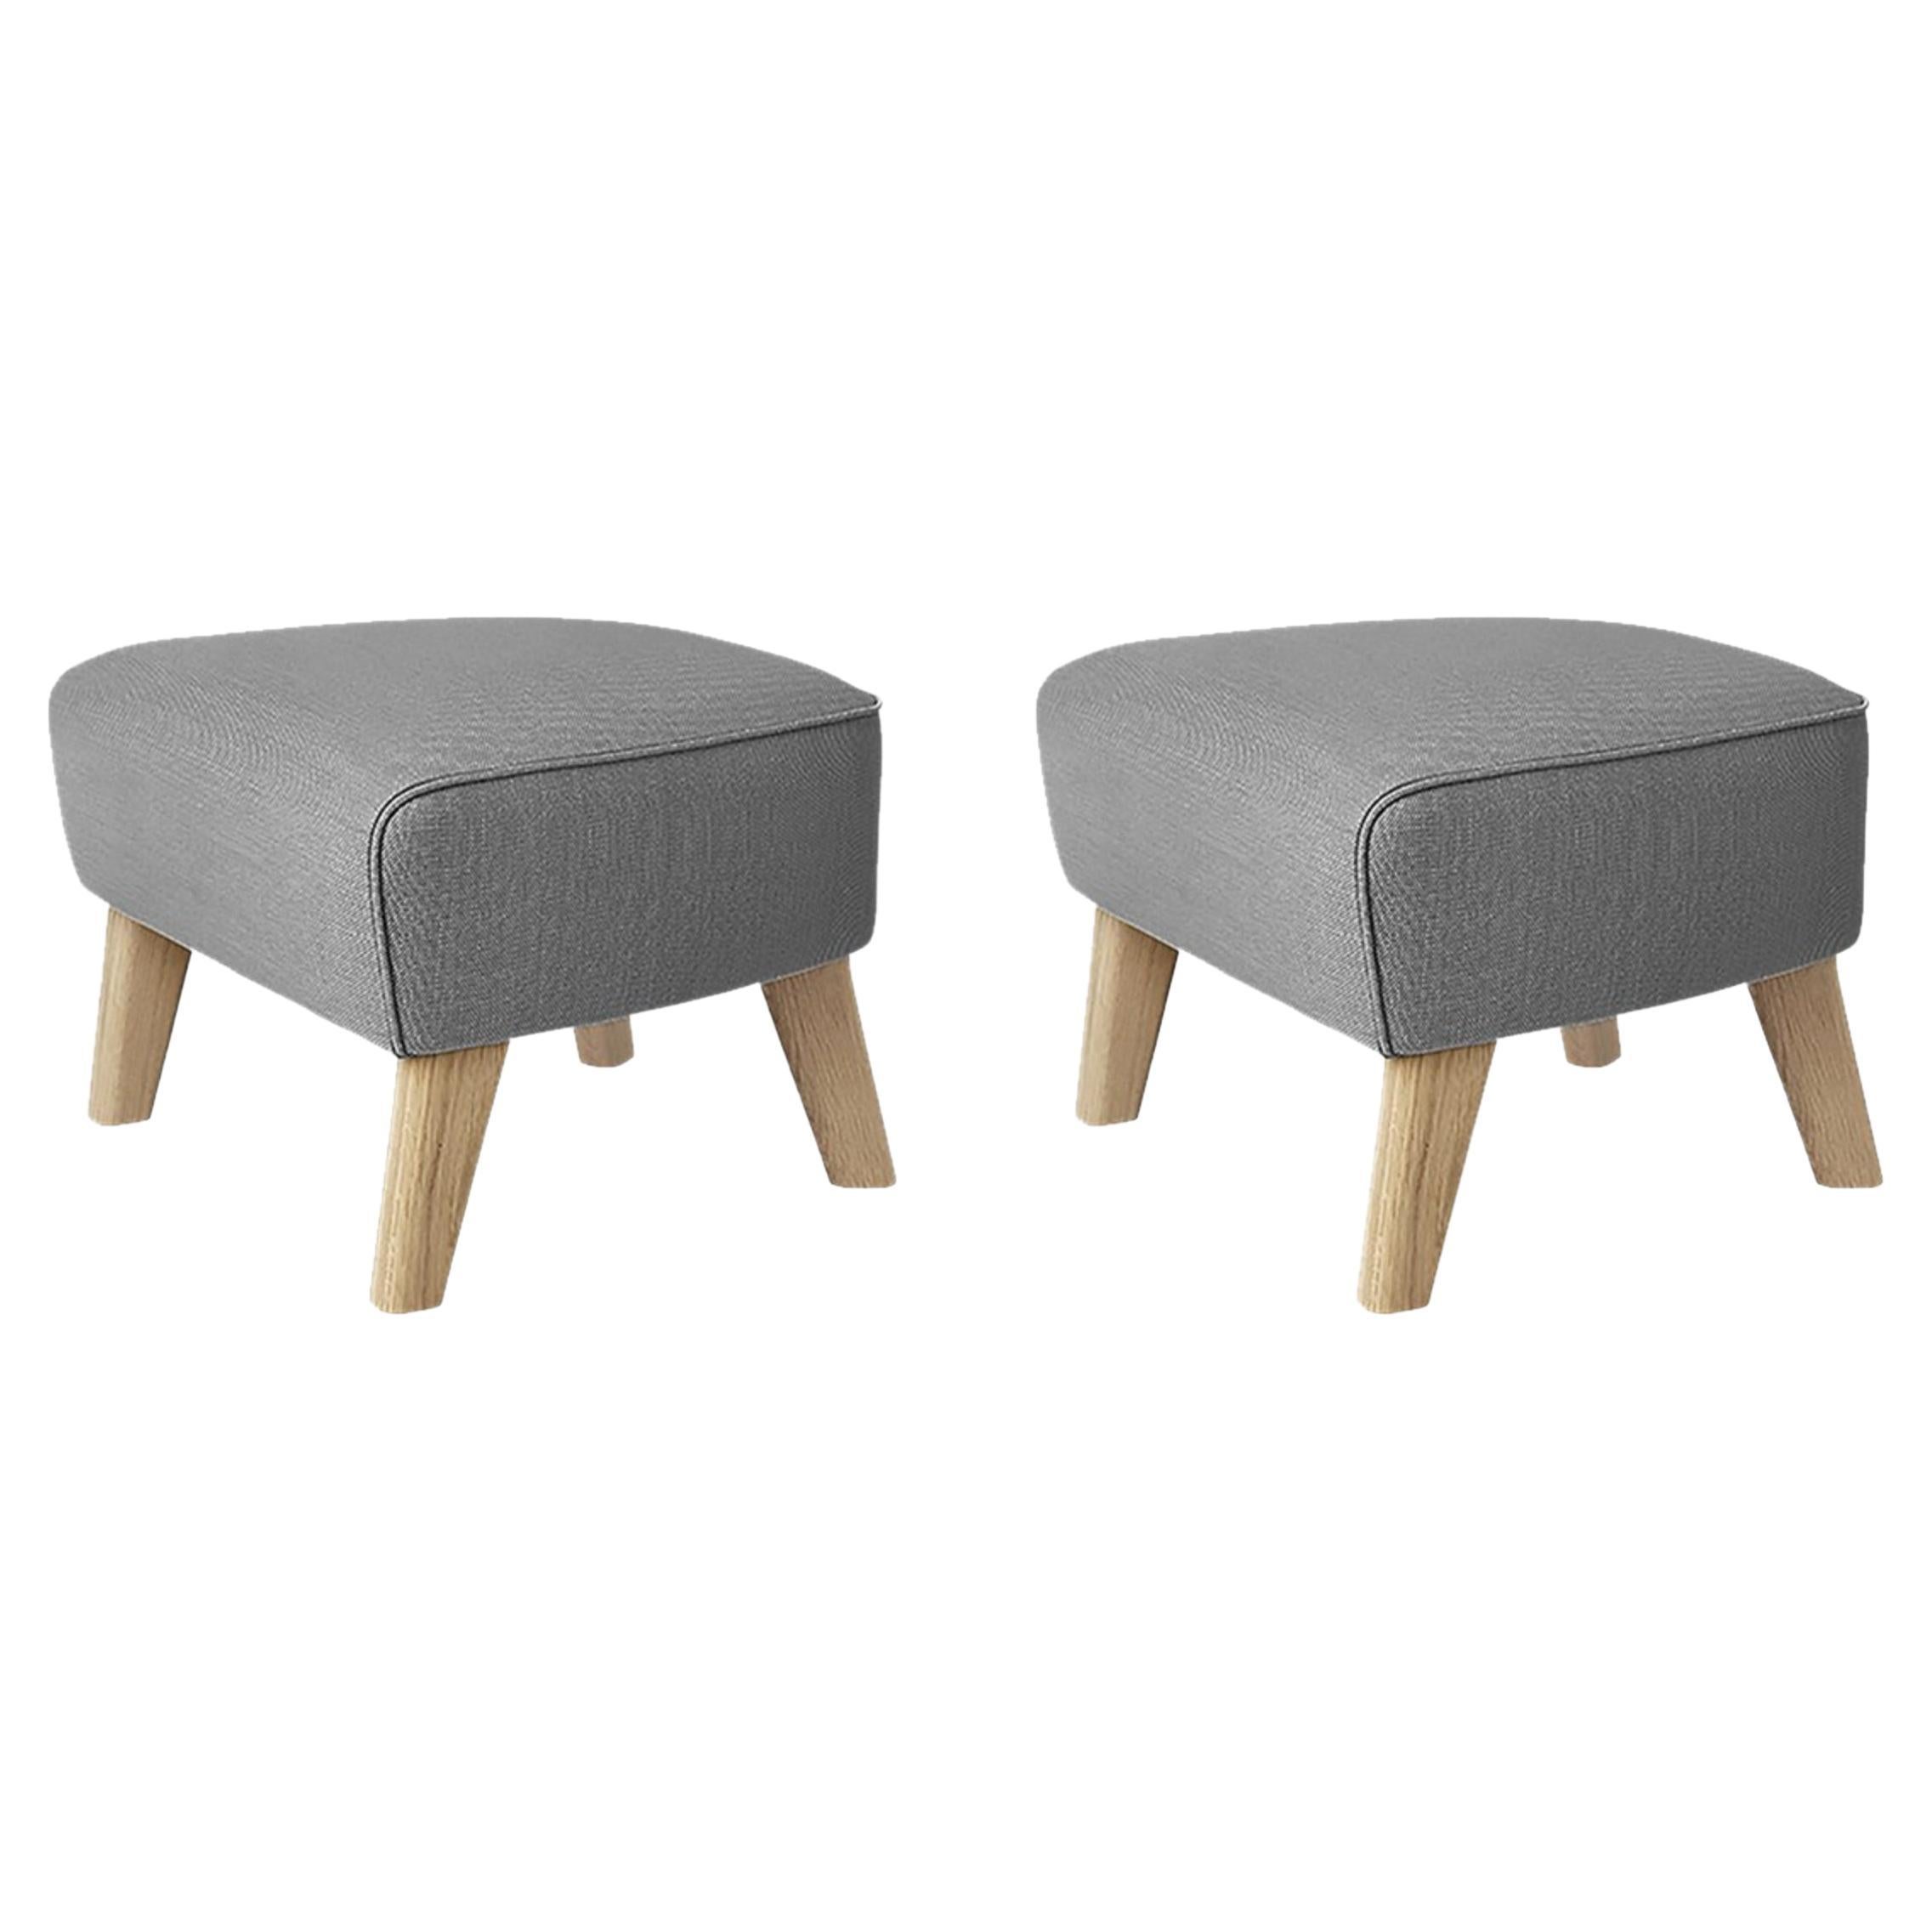 Set of 2 Grey and Natural Oak Sahco Zero Footstool by Lassen For Sale